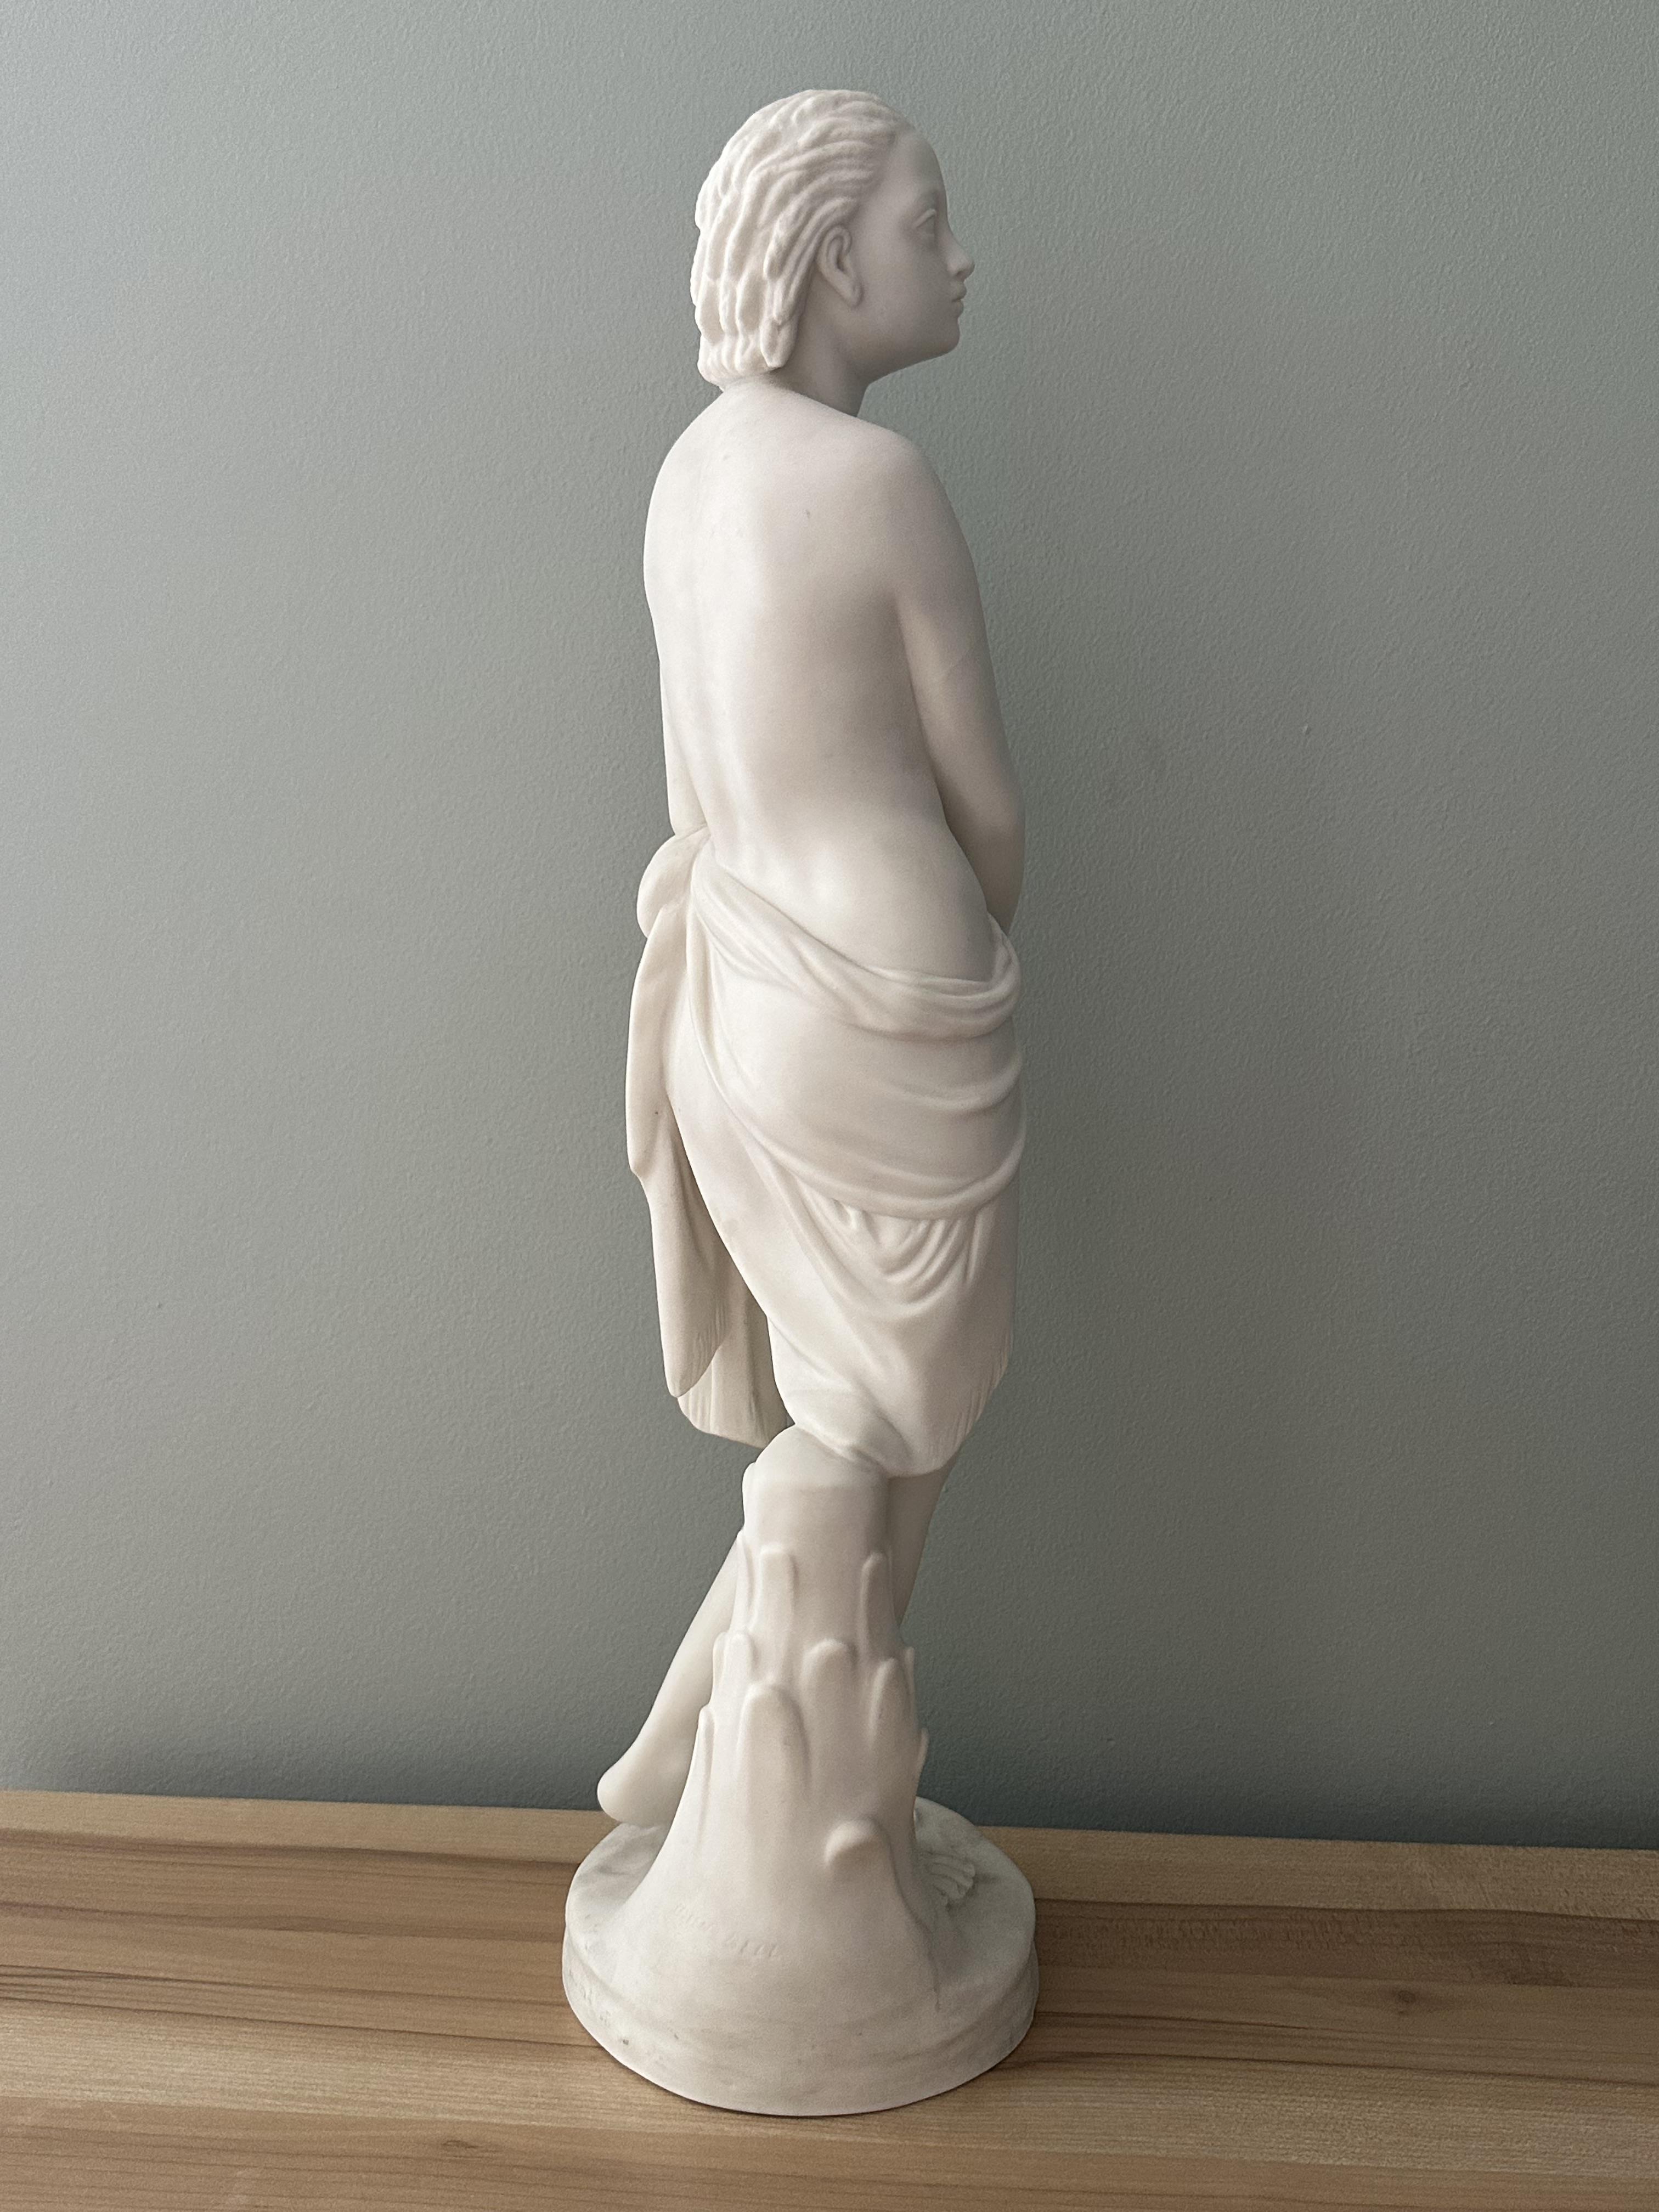 Parian Ware Minton Sculpture by John Bell. One ha - Image 7 of 16